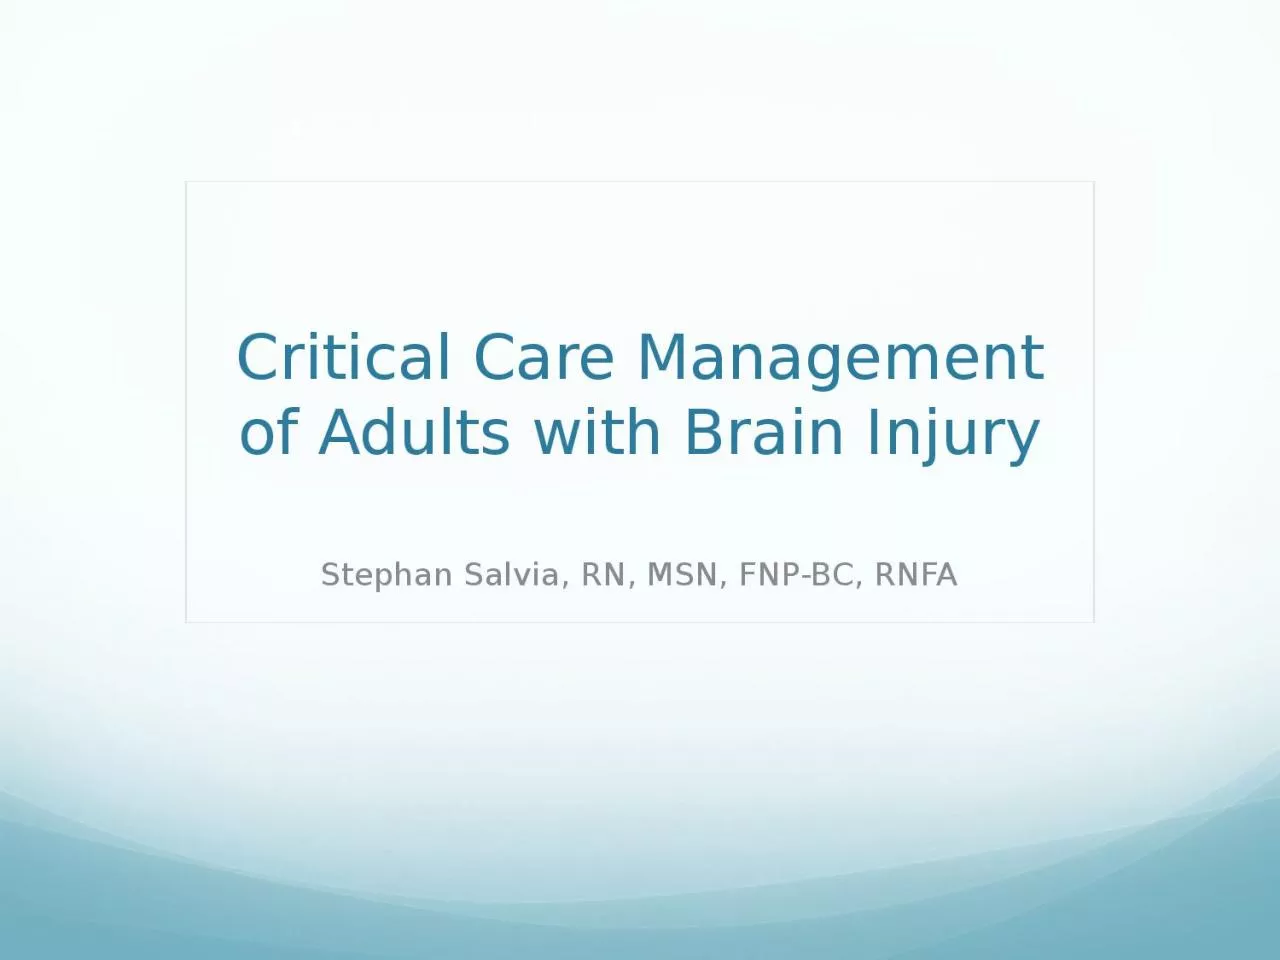 Critical Care Management of Adults with Brain Injury